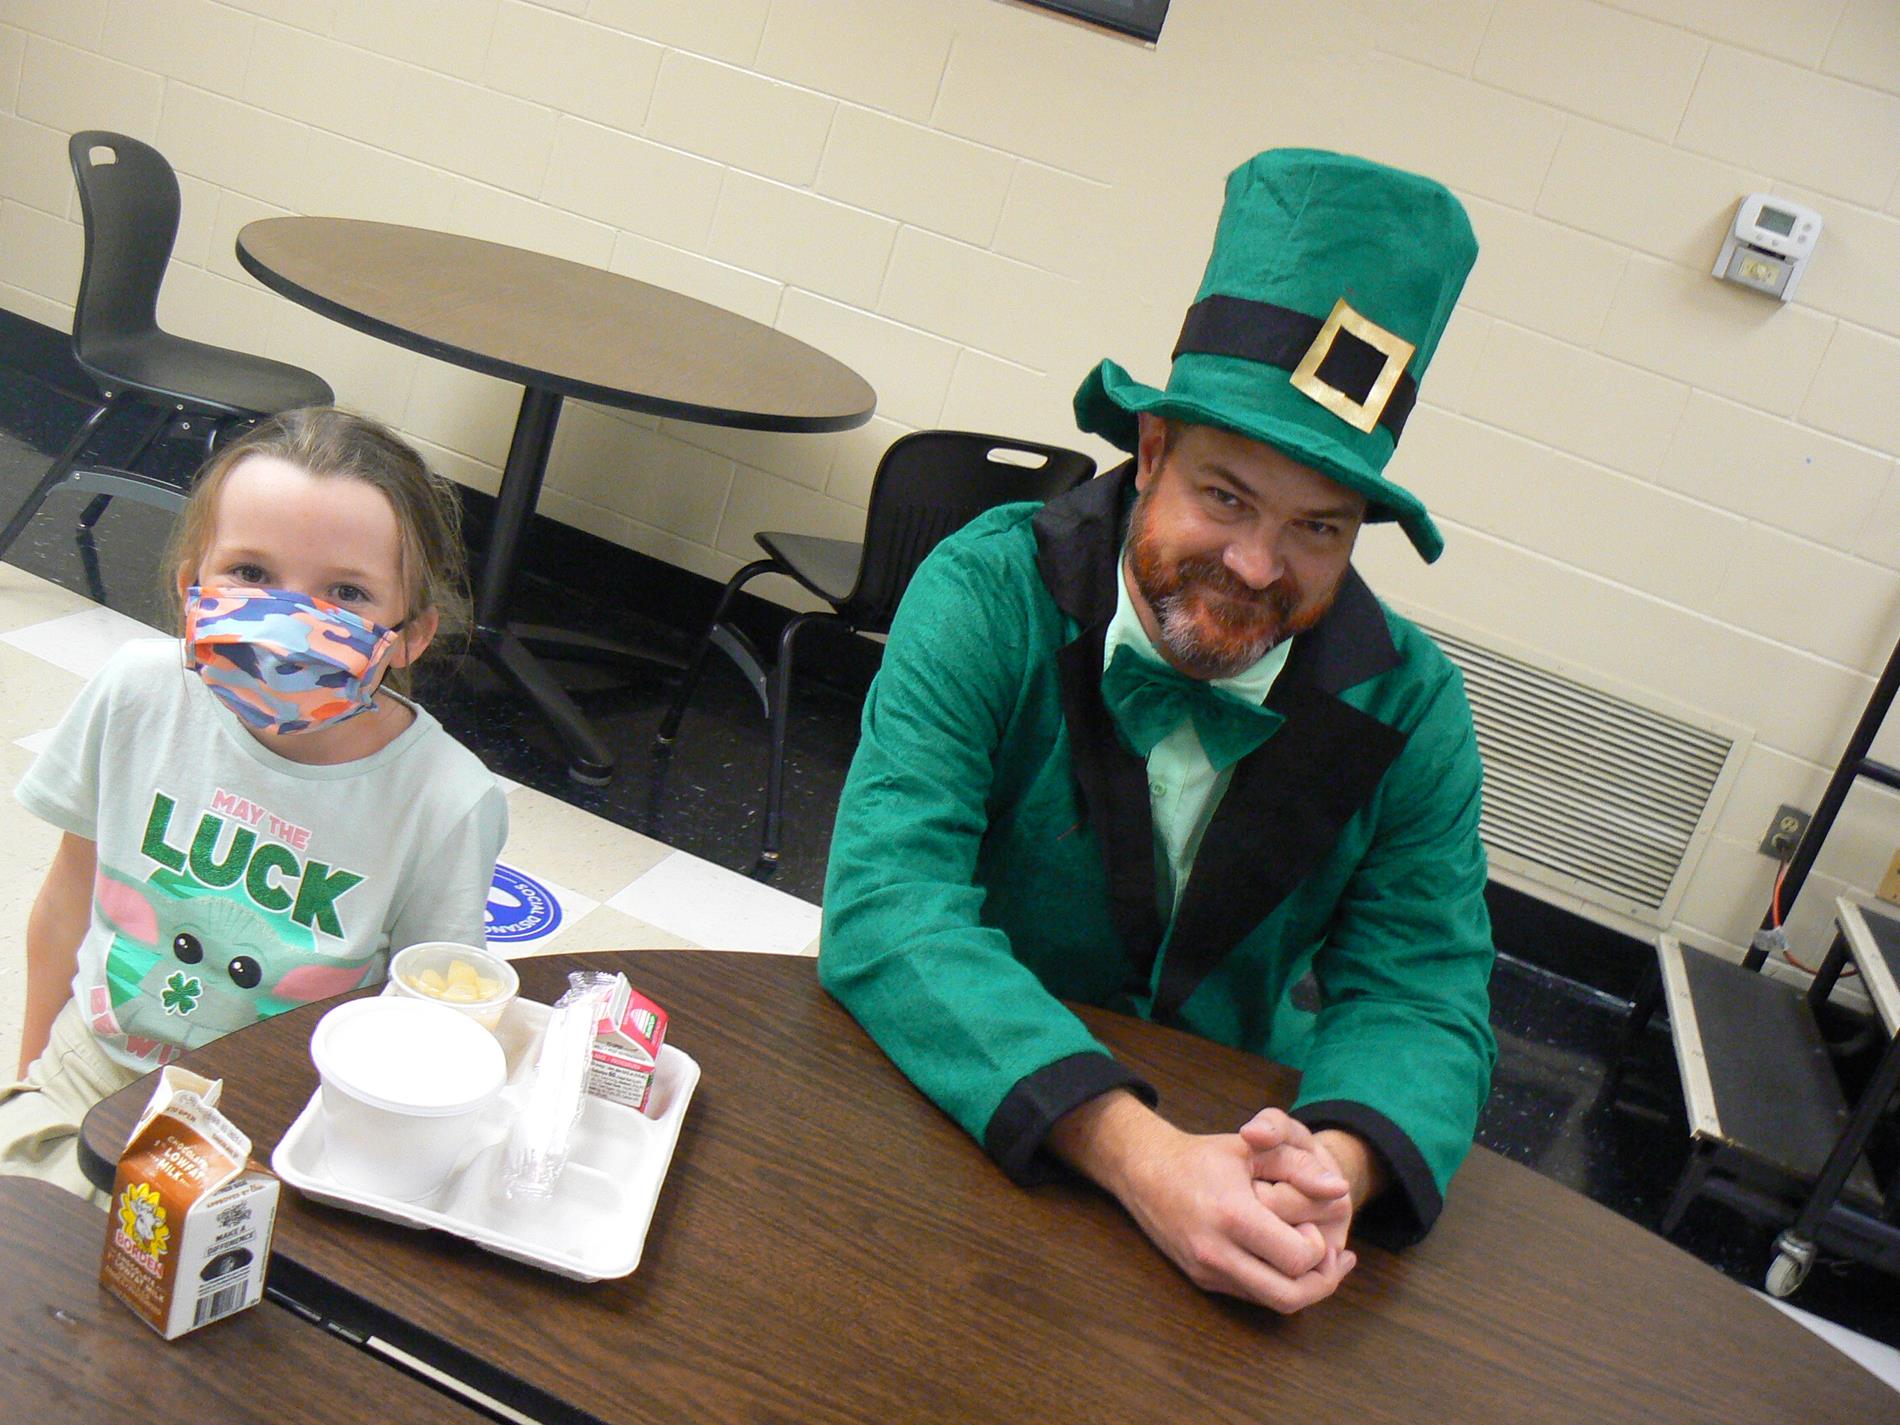 Students were visited by the leprechaun during lunch.